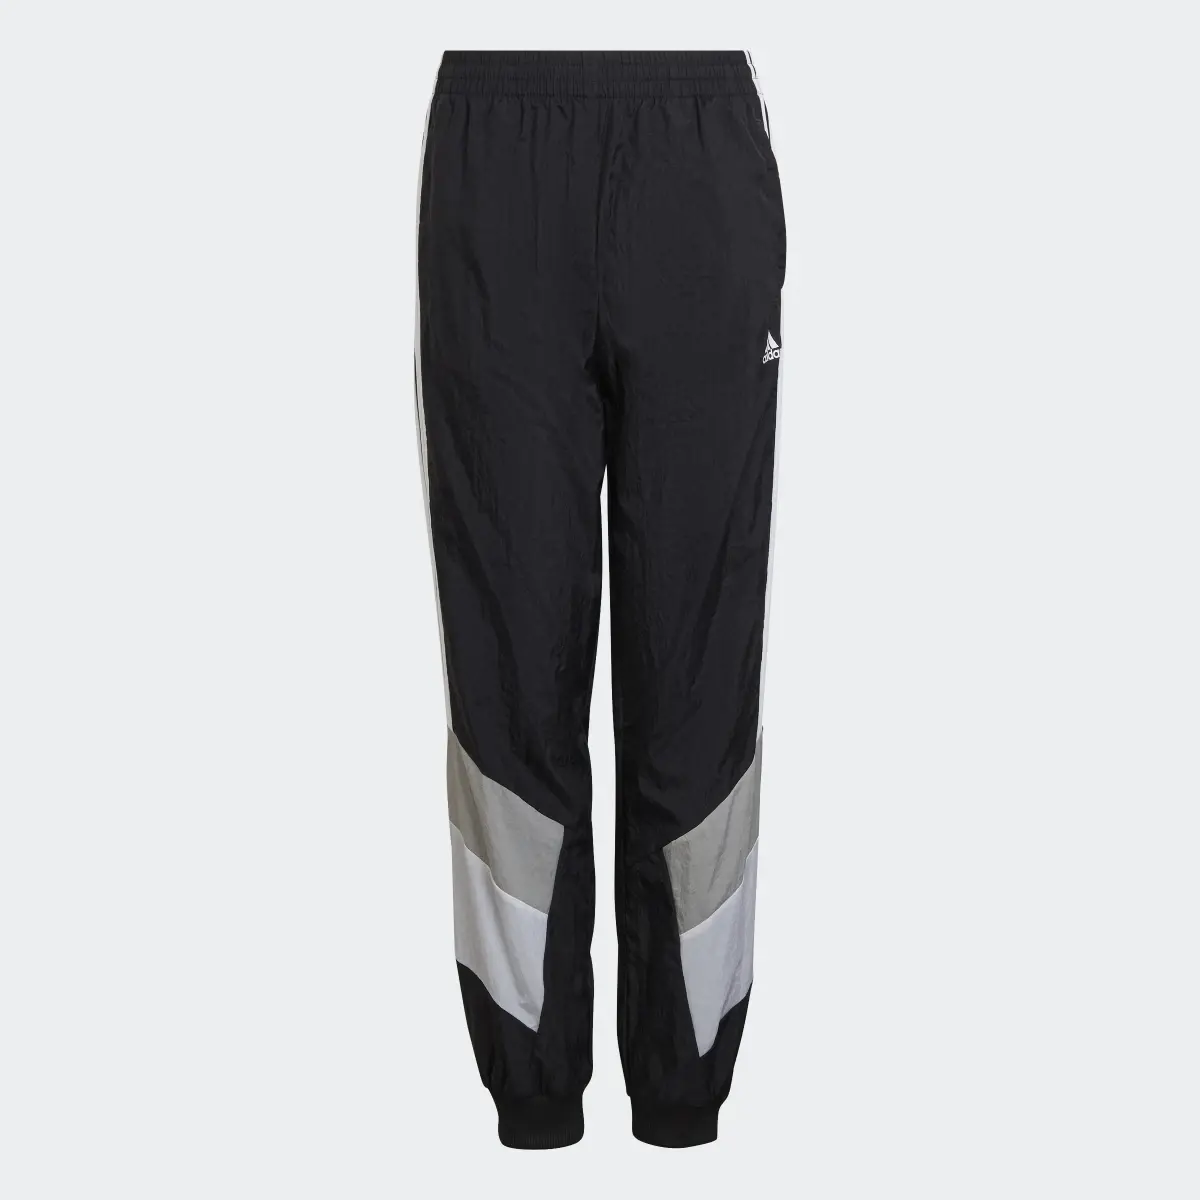 Adidas Colorblock Woven Tracksuit Bottoms. 1